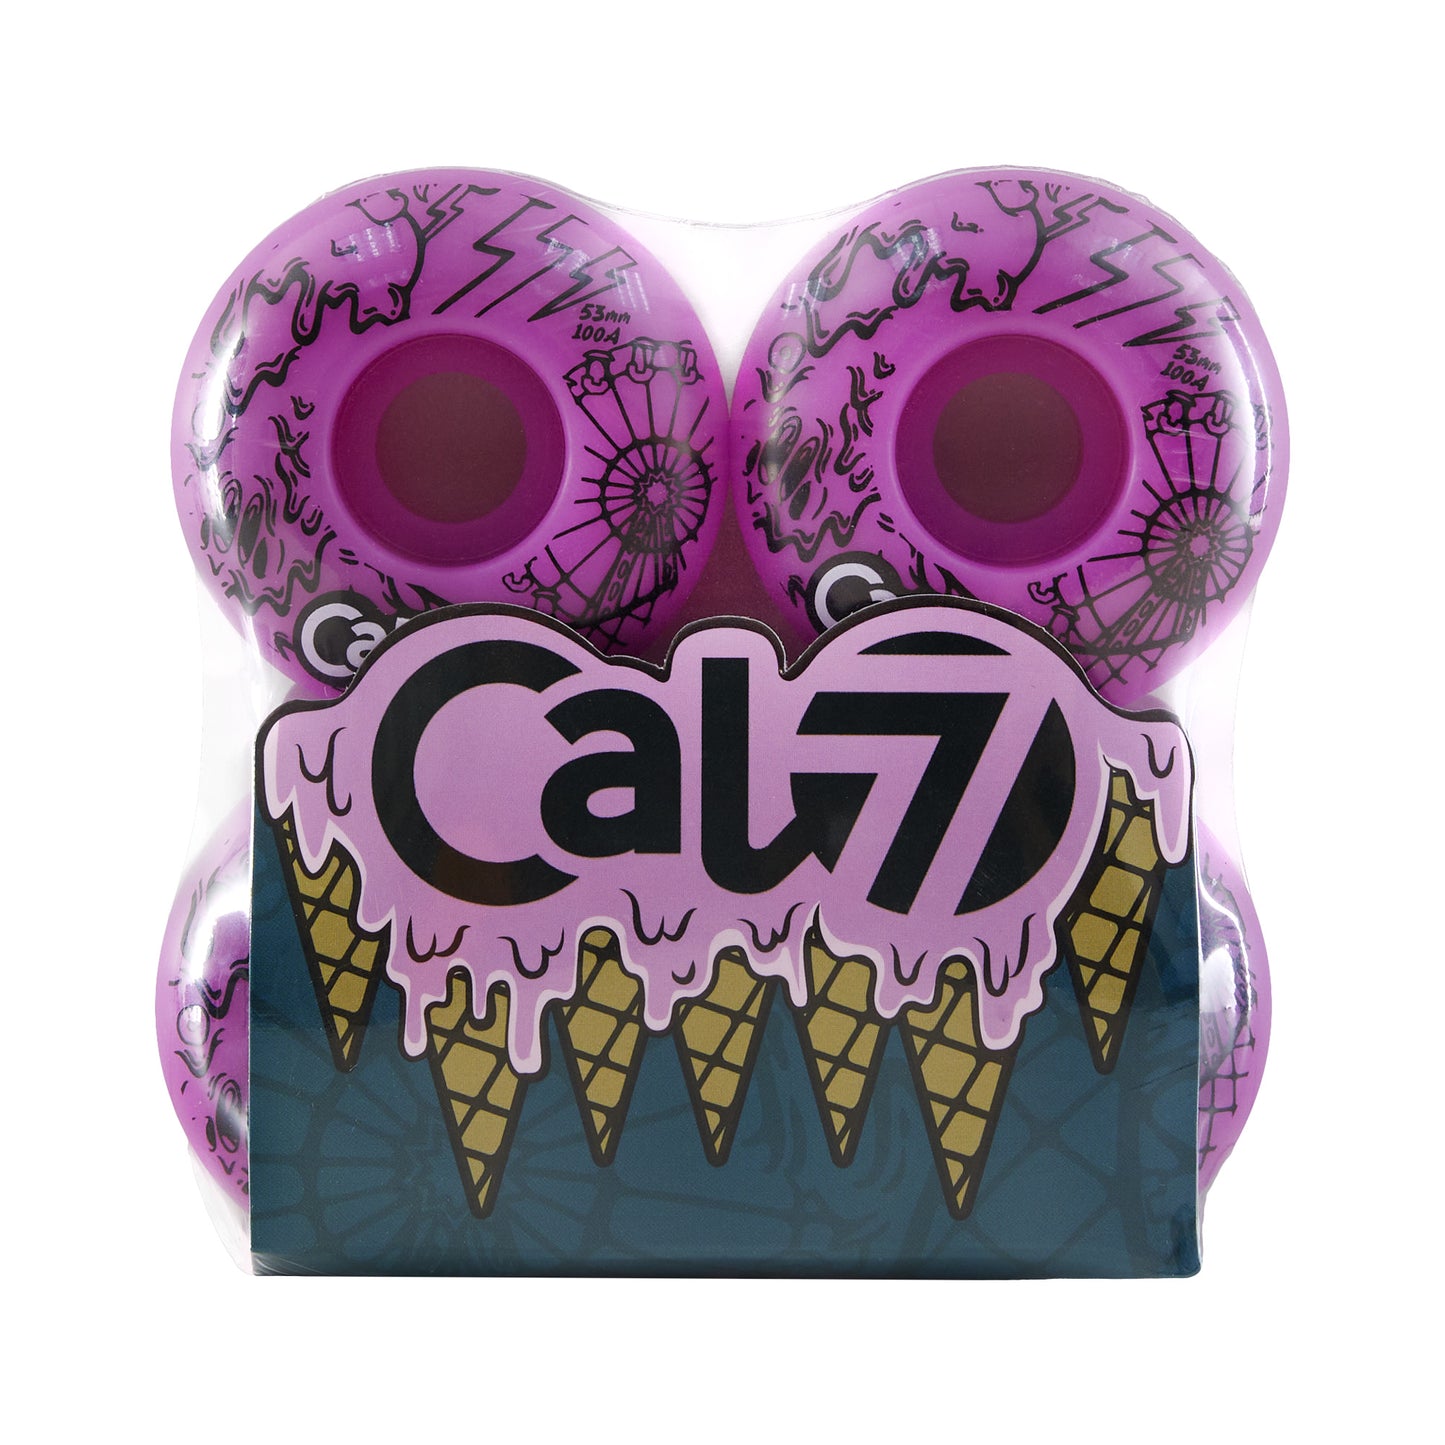 Cal 7 Frenzy 53mm 100A pink skateboard wheels with ice cream linear art design 